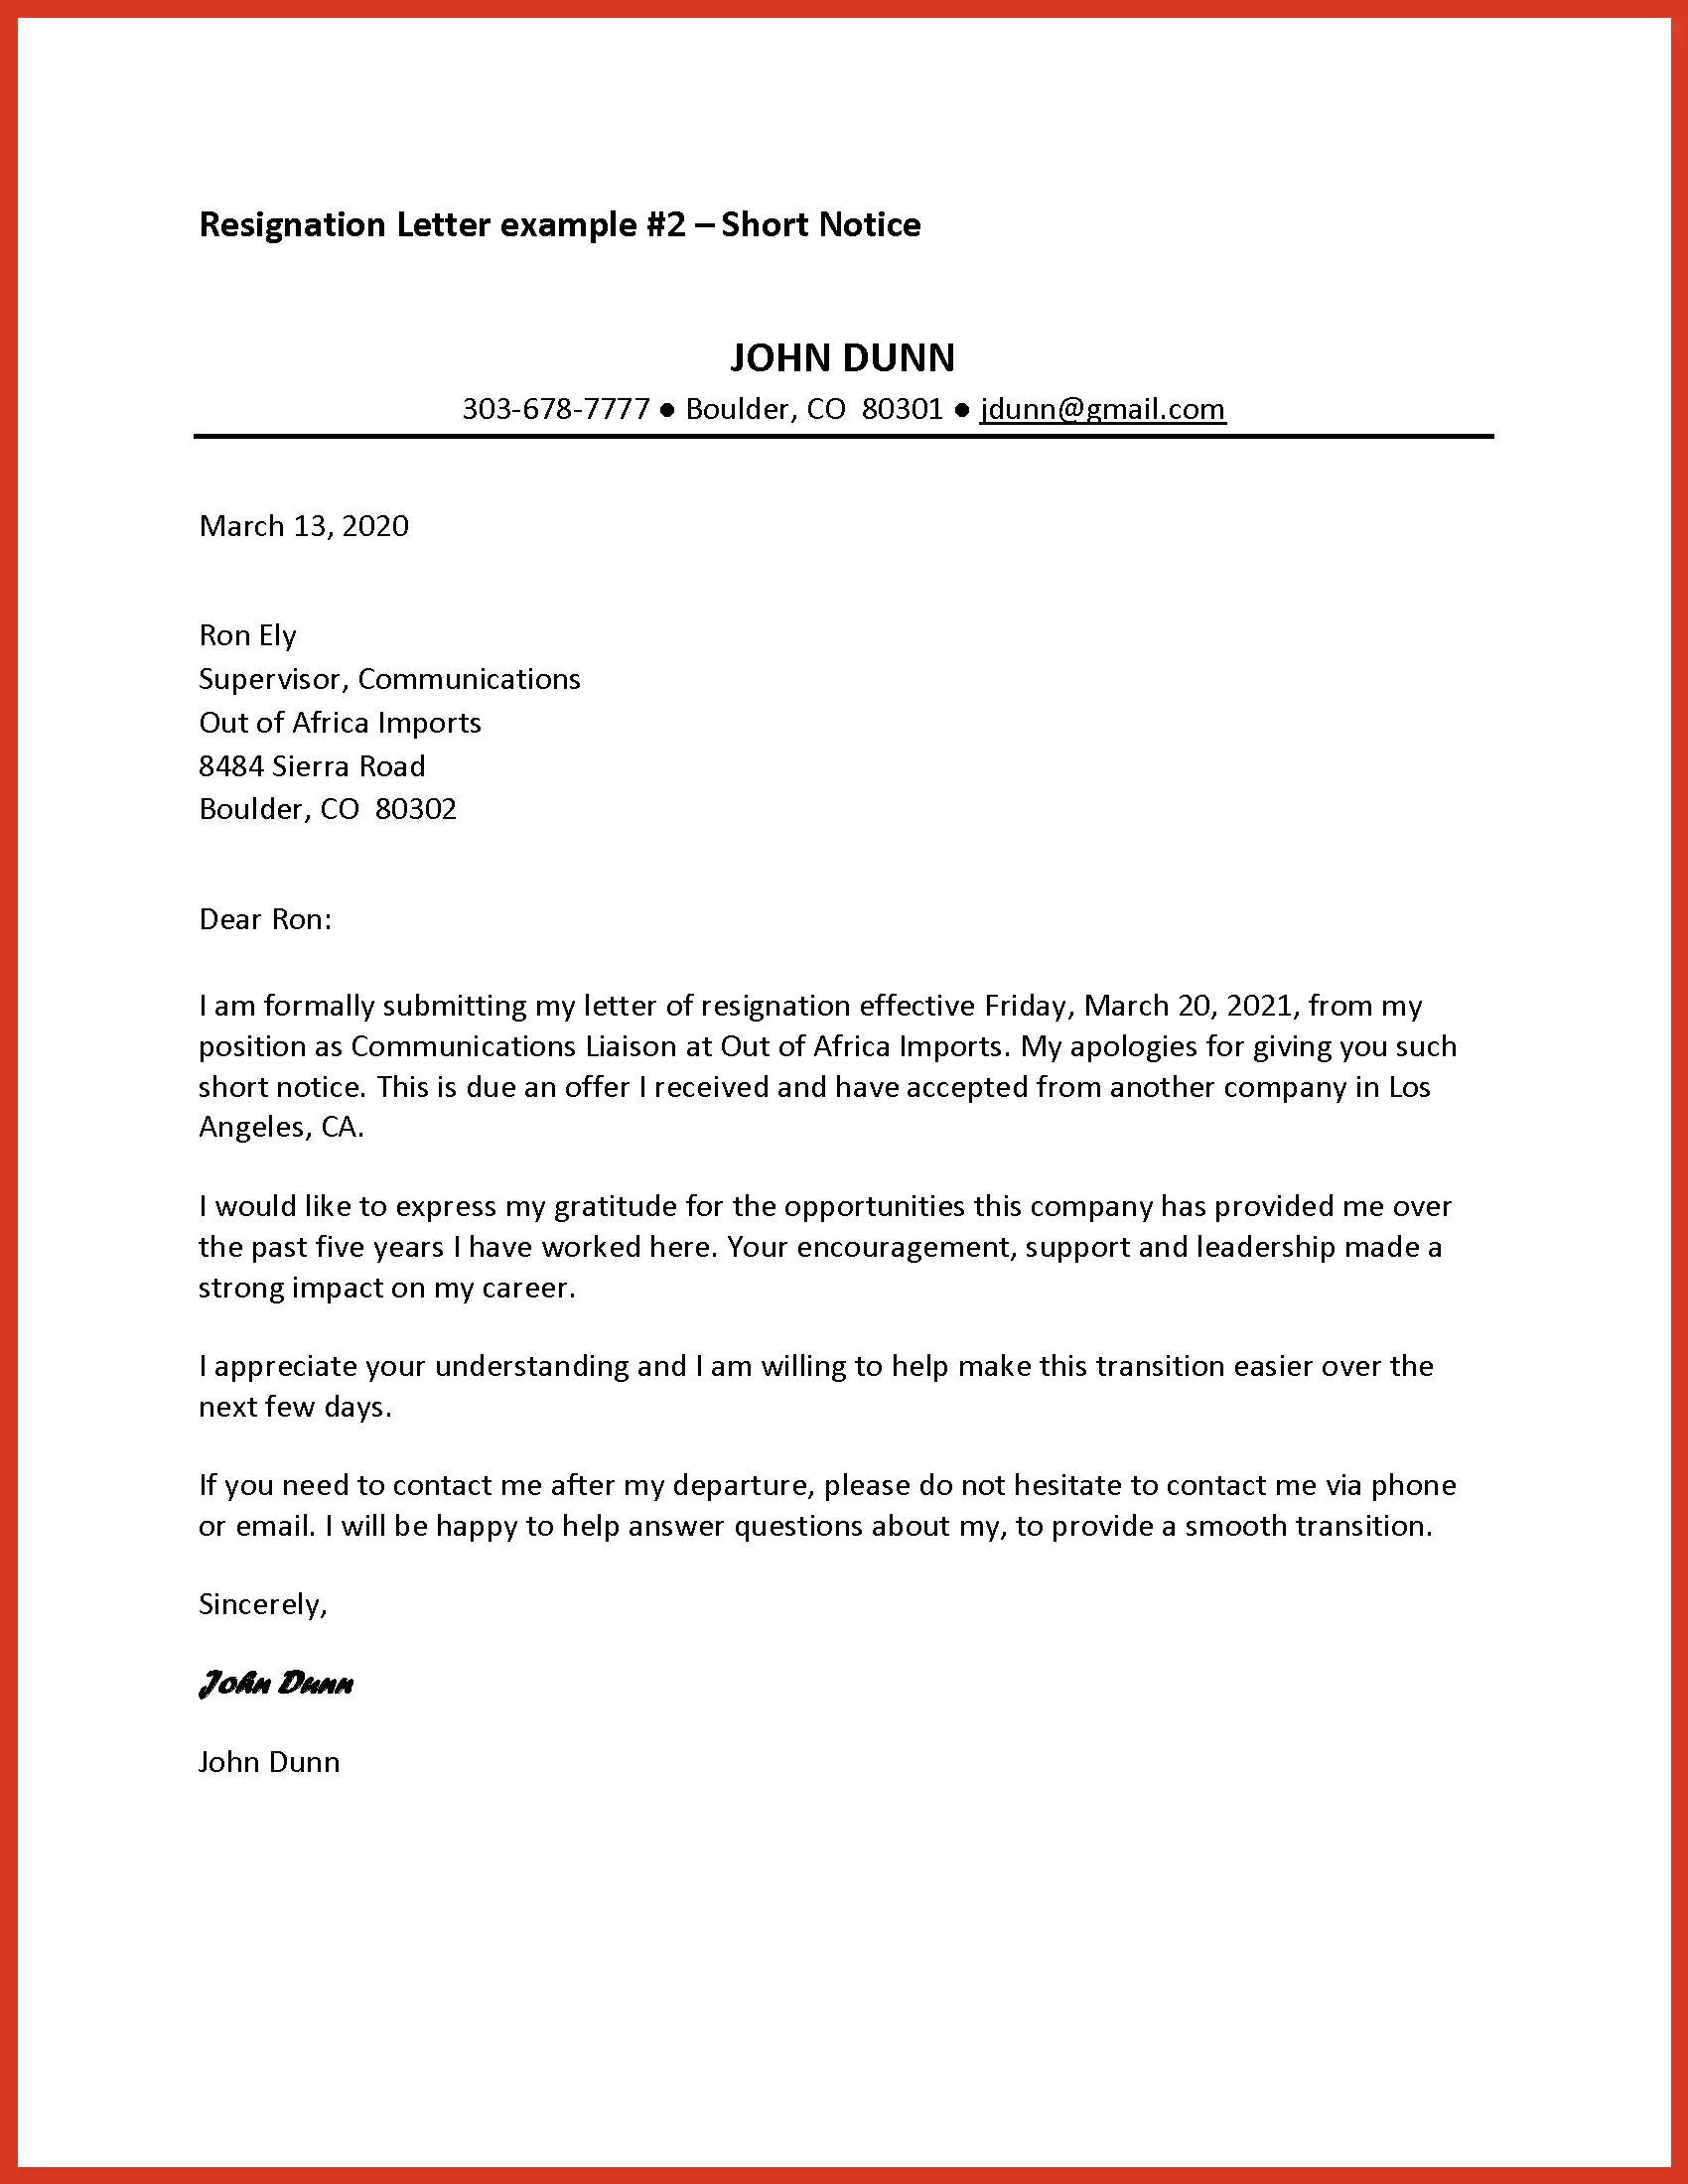 Downloadable short notice resignation letter examples